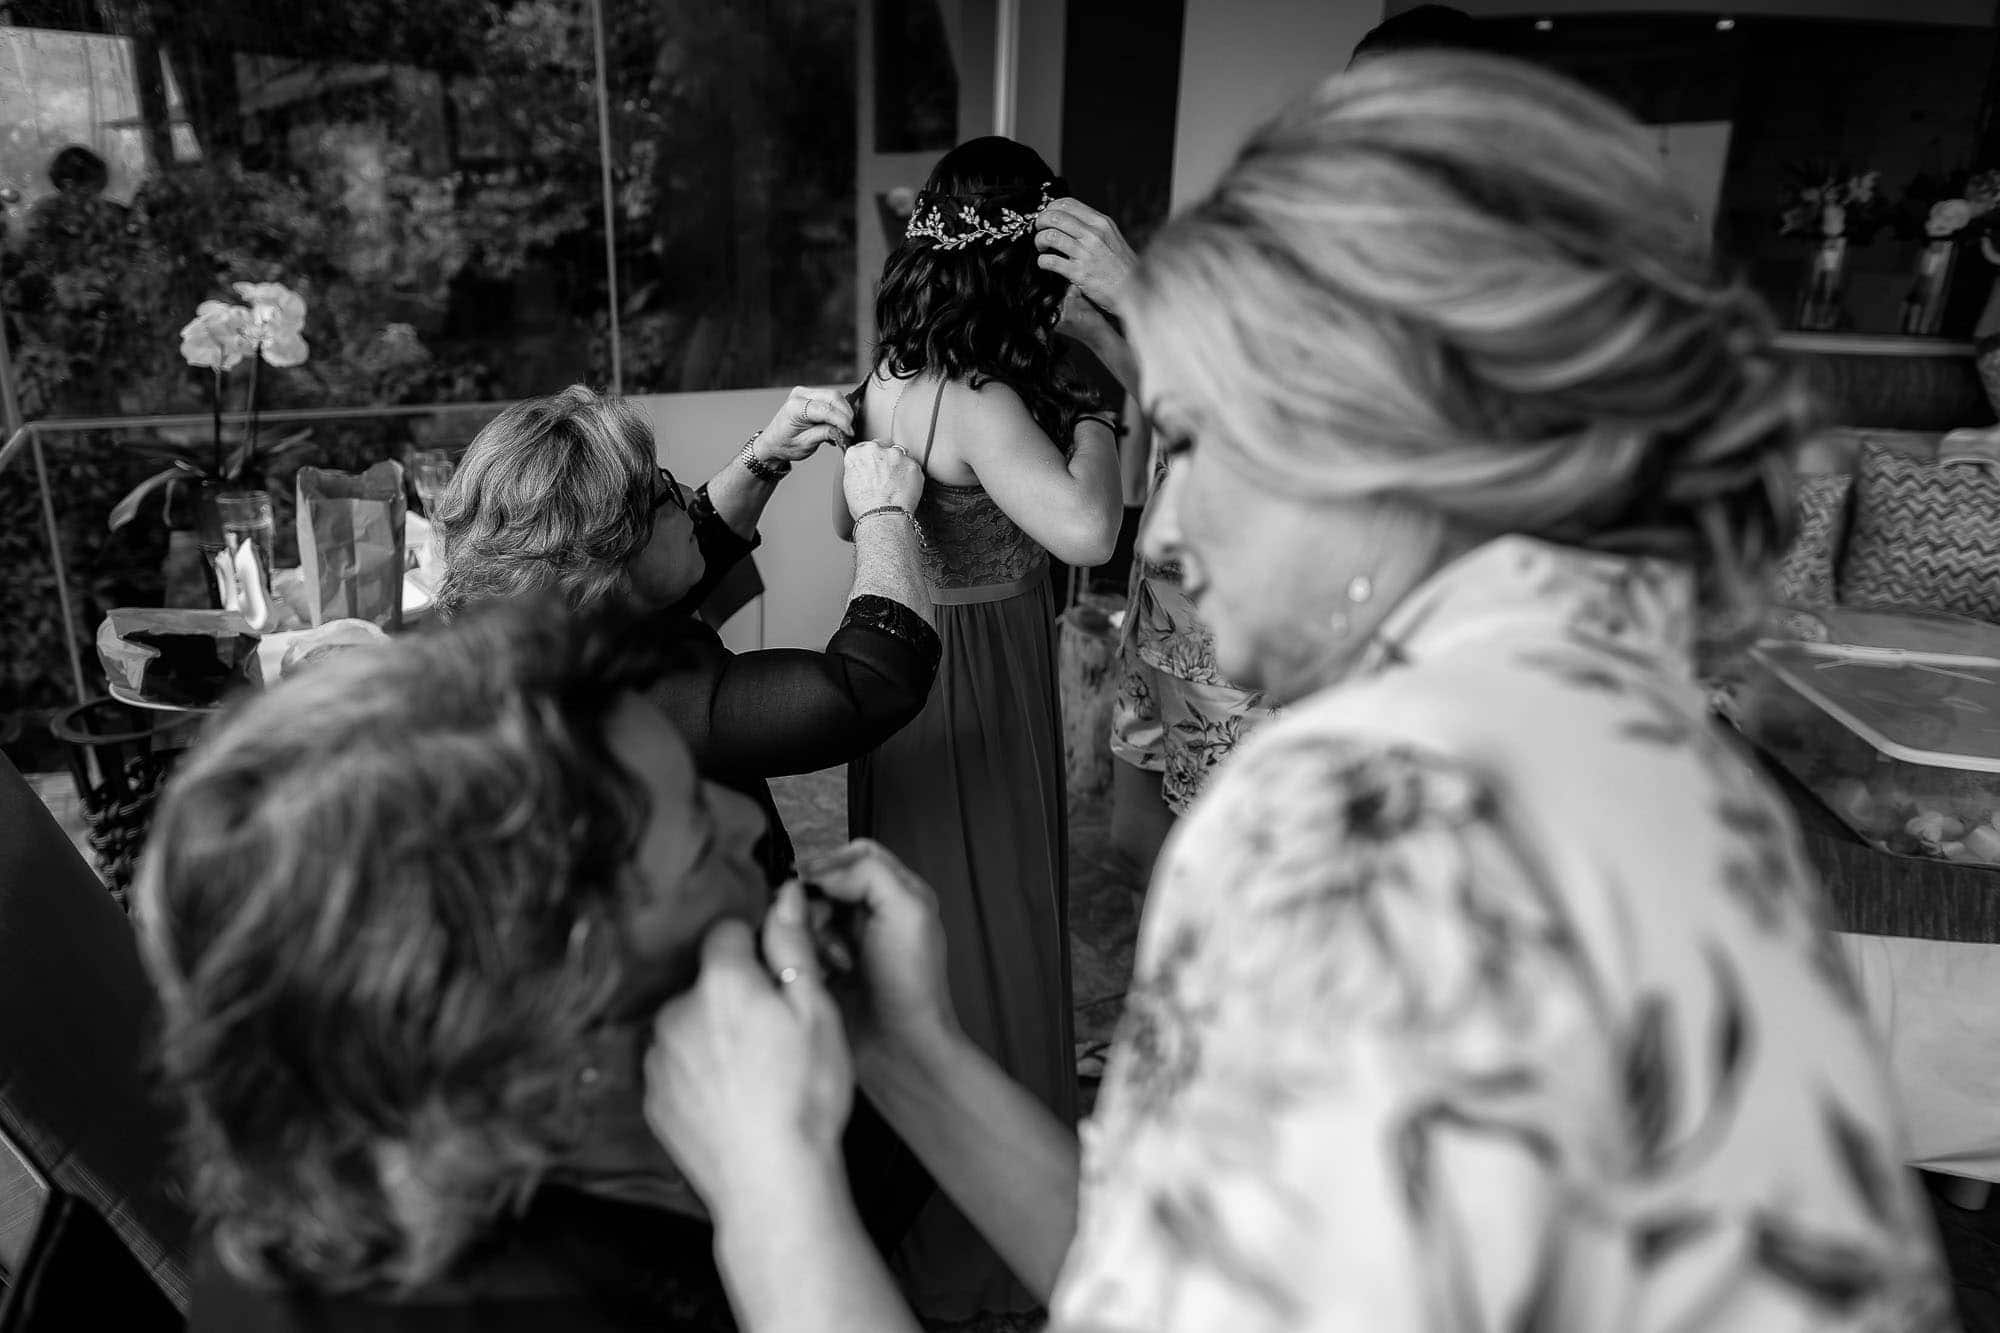 Getting ready is part of the Costa Rica wedding experience!